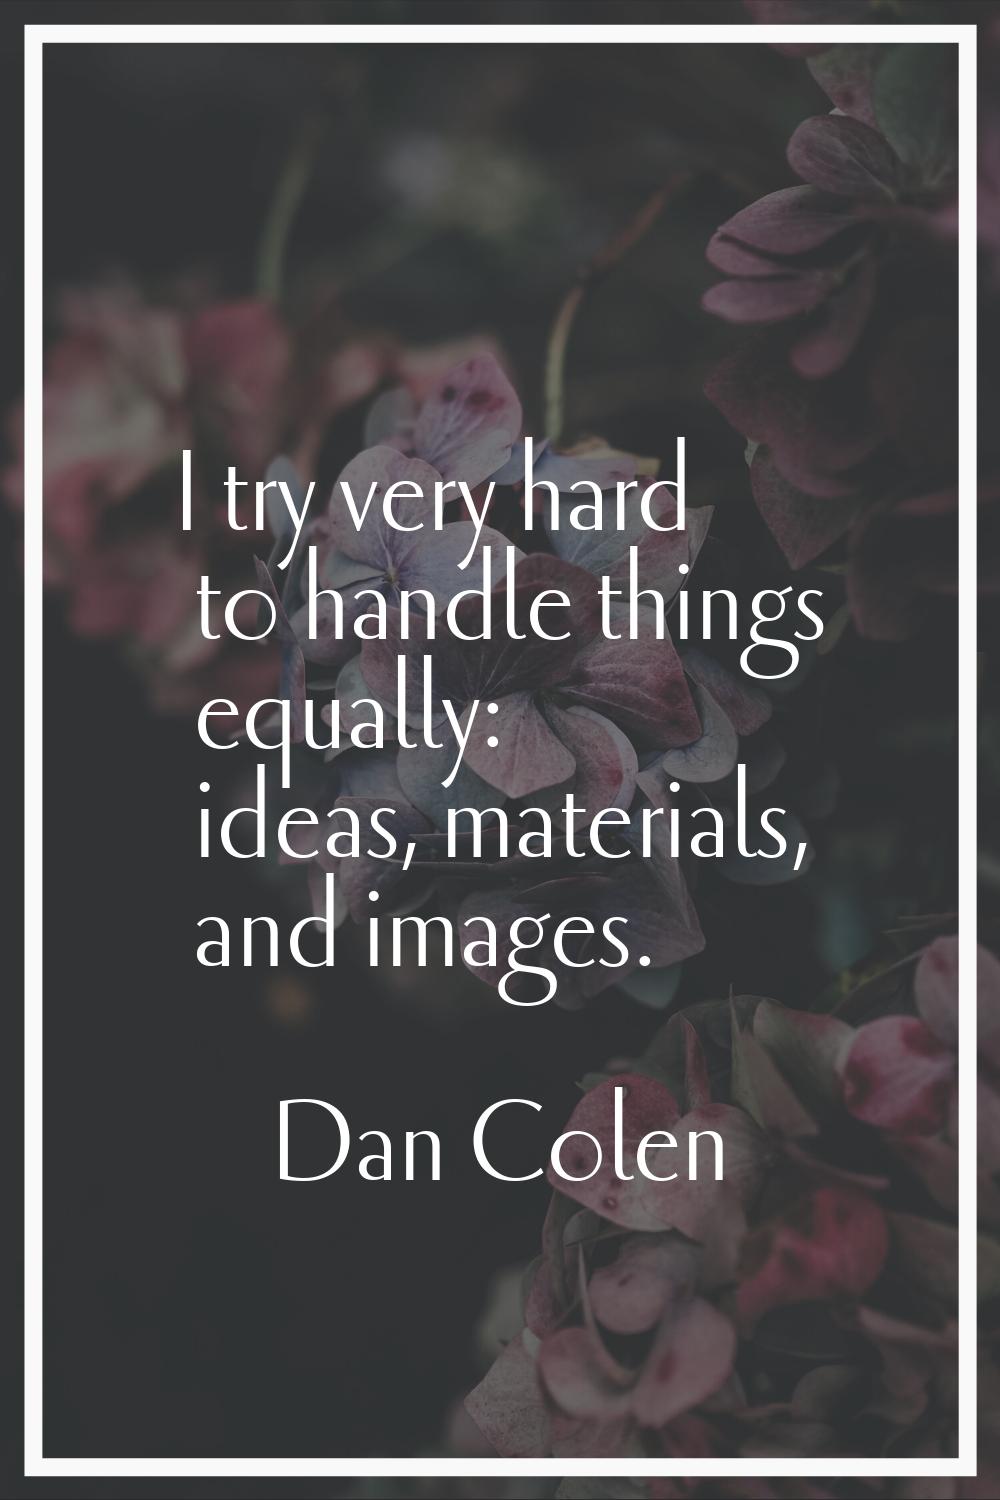 I try very hard to handle things equally: ideas, materials, and images.